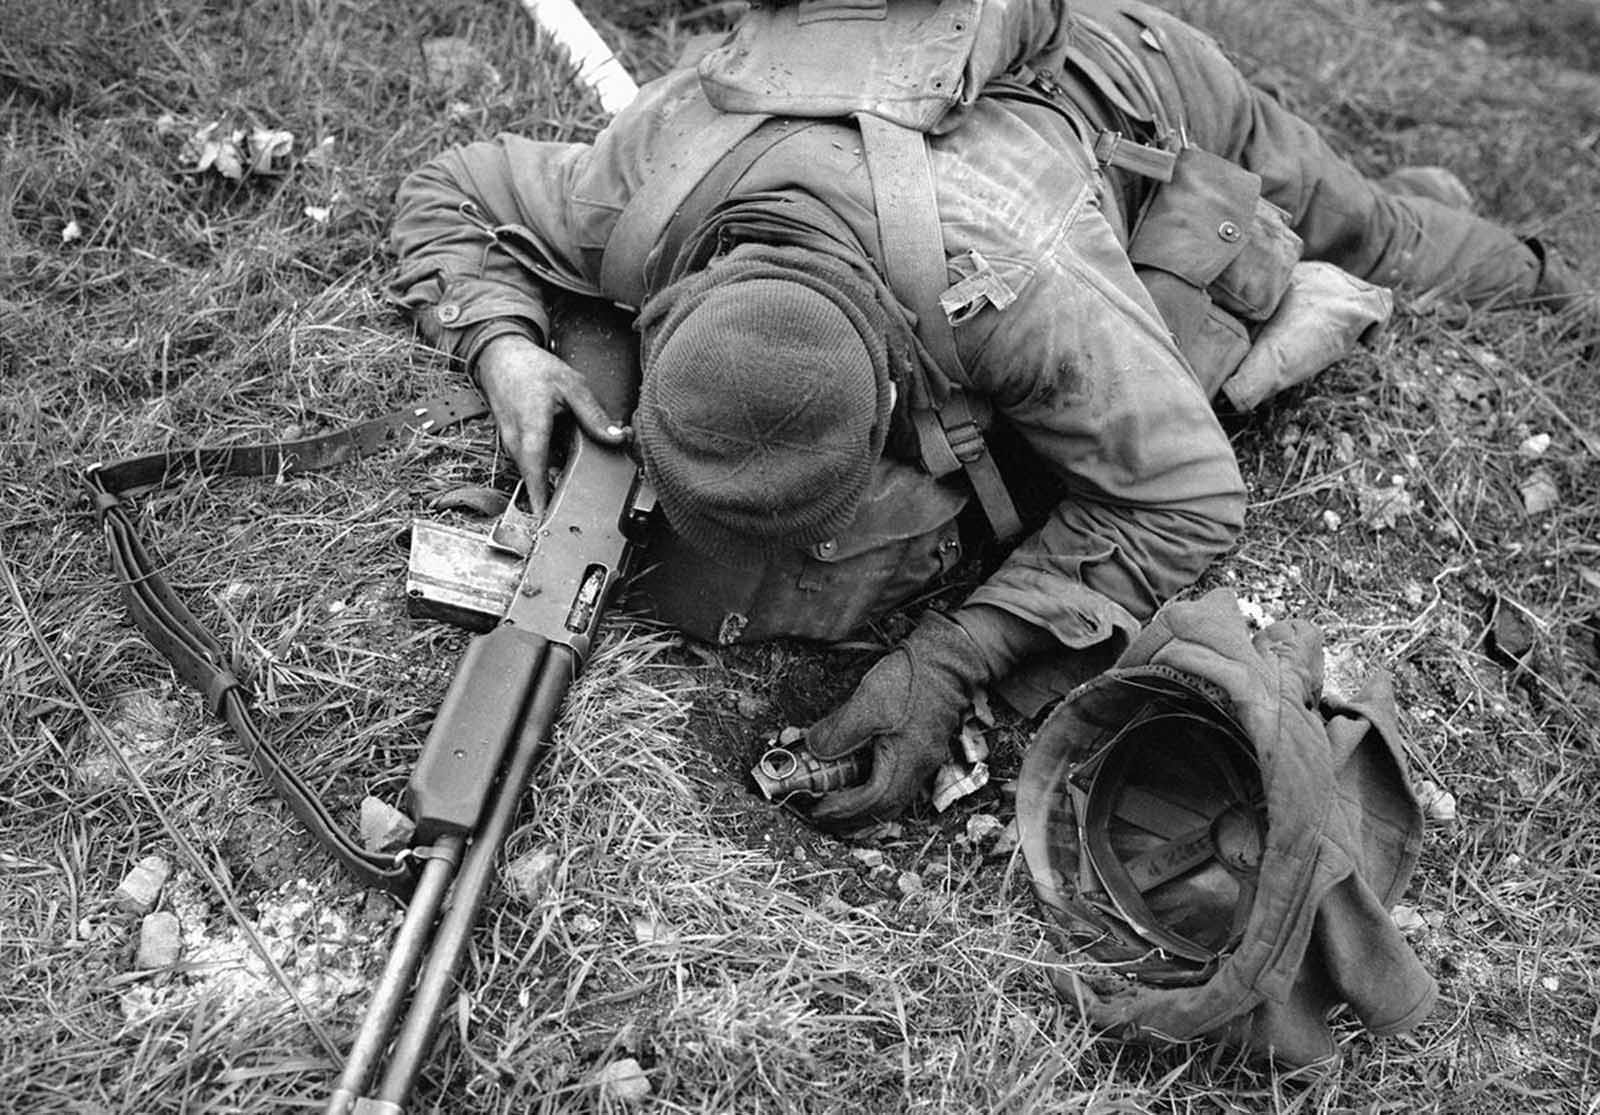 An unidentified American soldier, shot dead by a German sniper, clutches his rifle and hand grenade in March of 1945 in Coblenz, Germany.